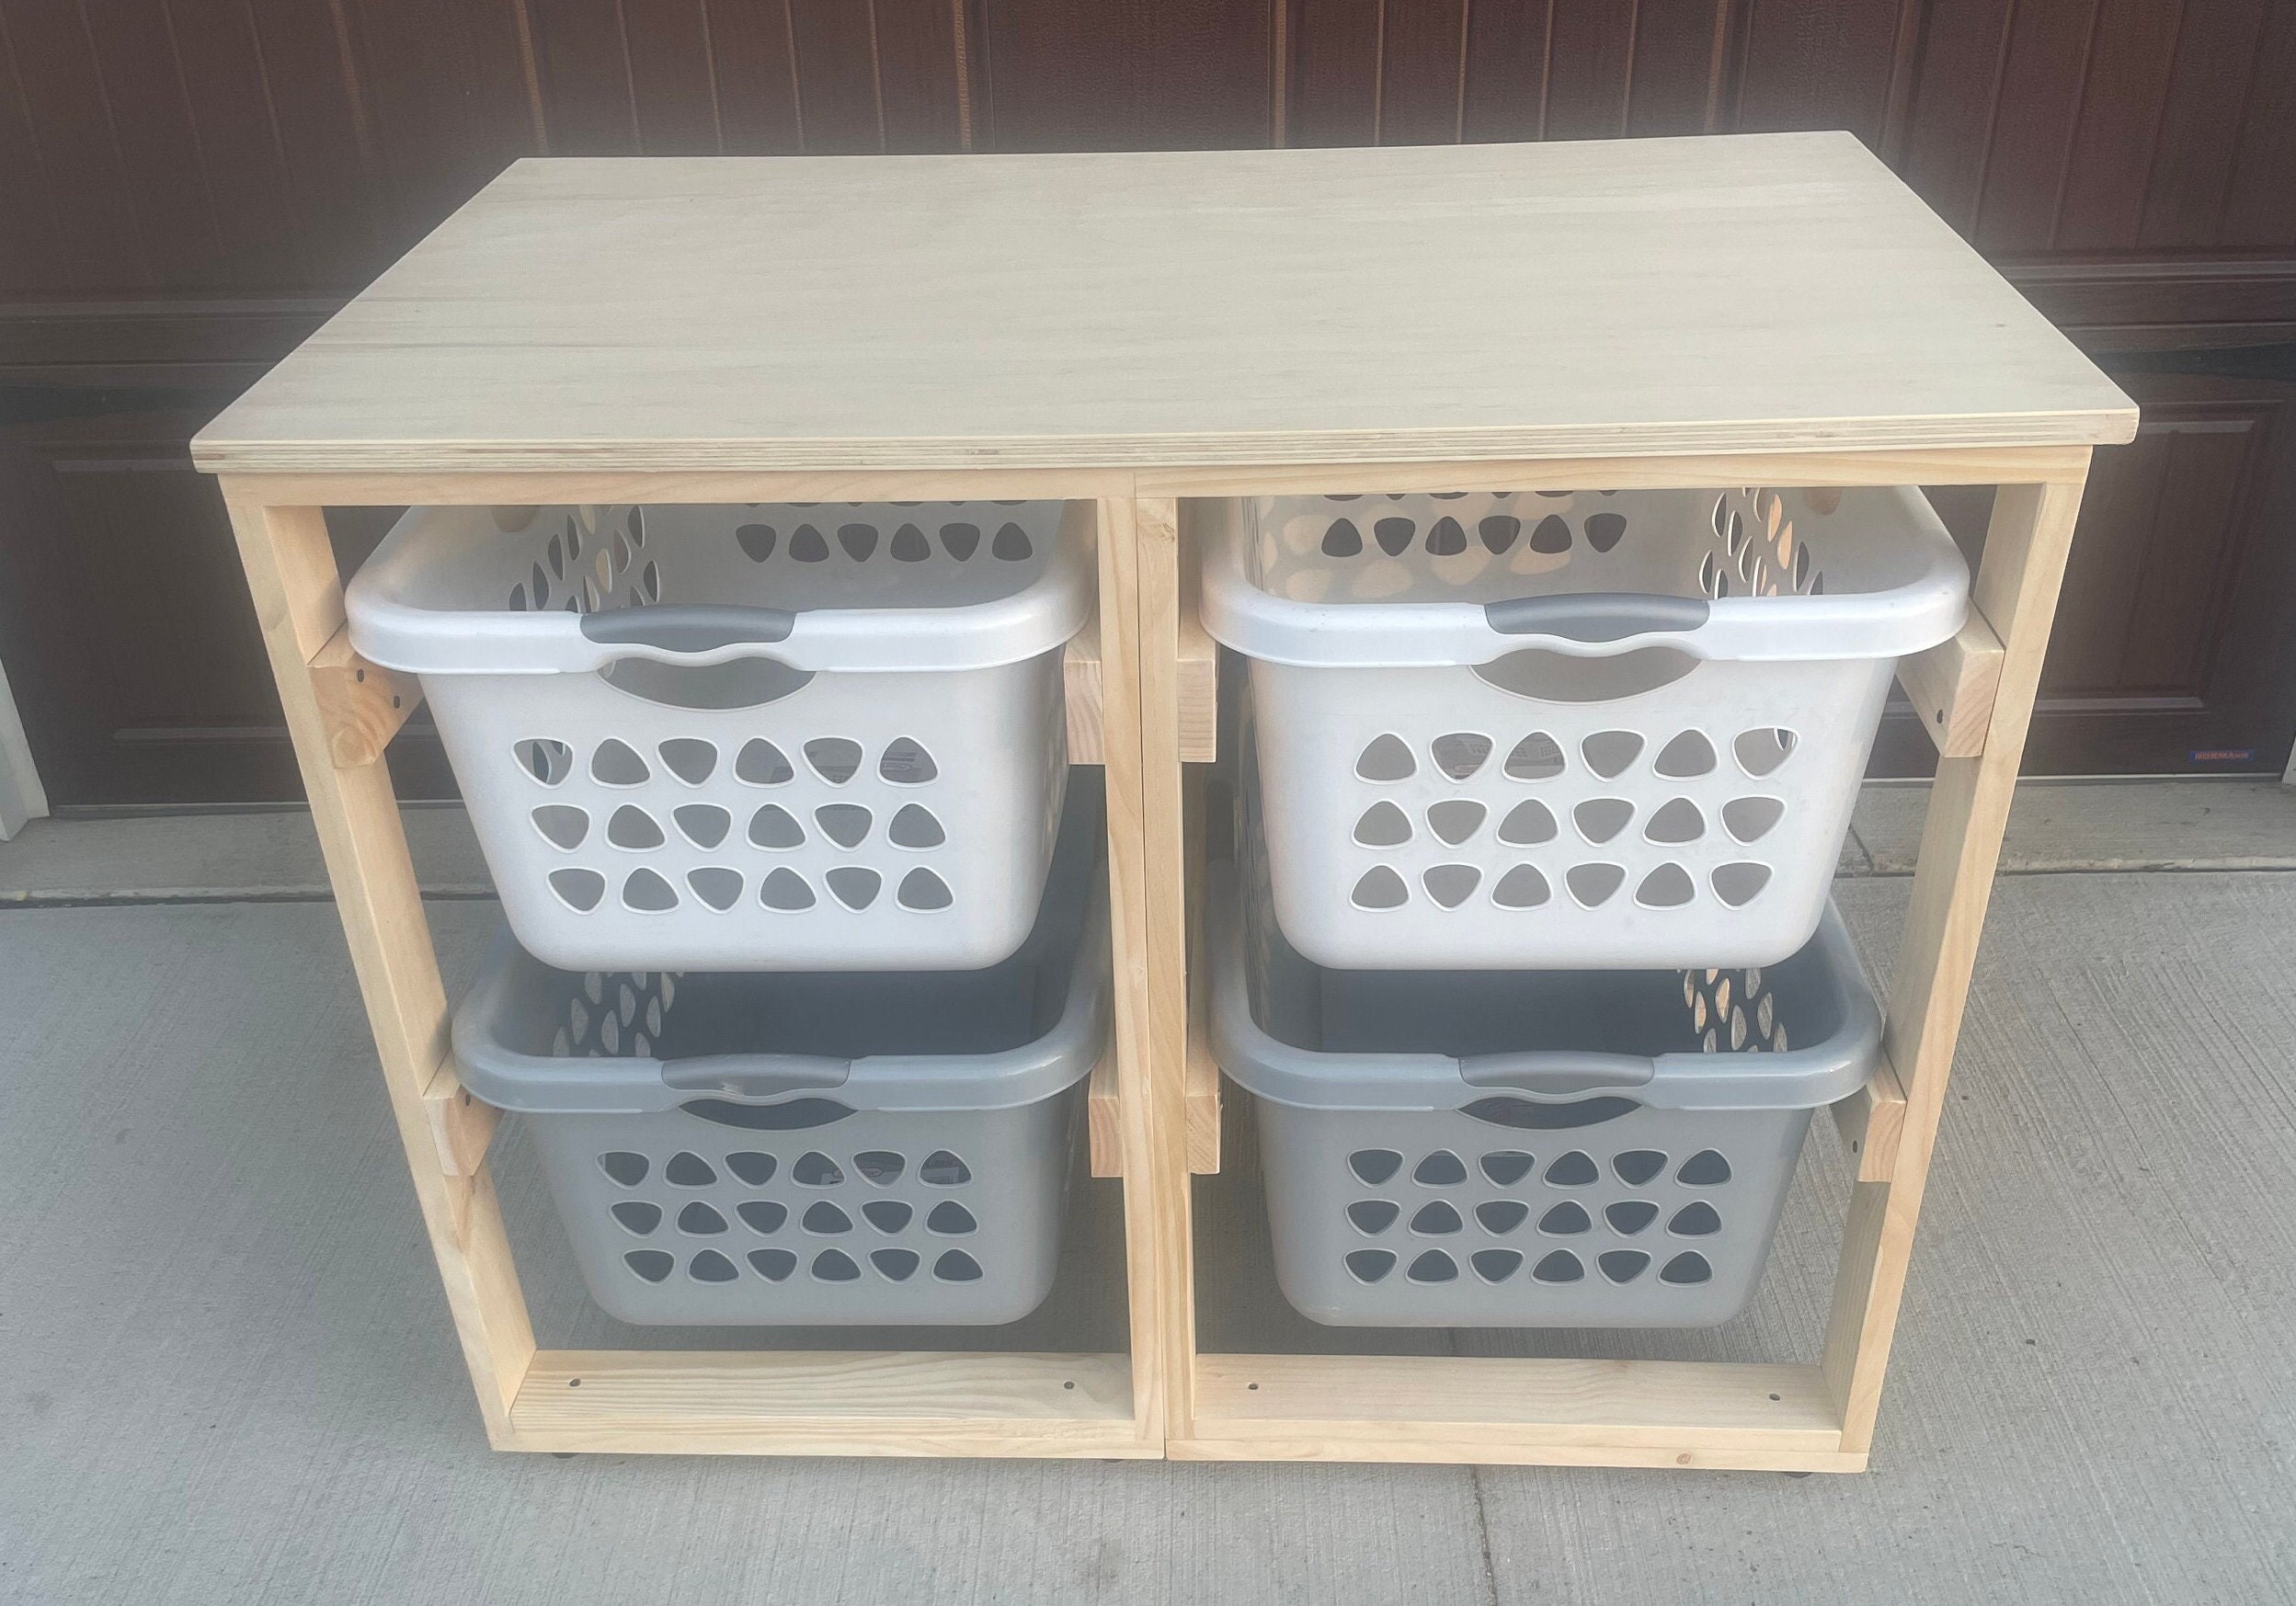 2 Tier Laundry basket holder - TheDustyBlade